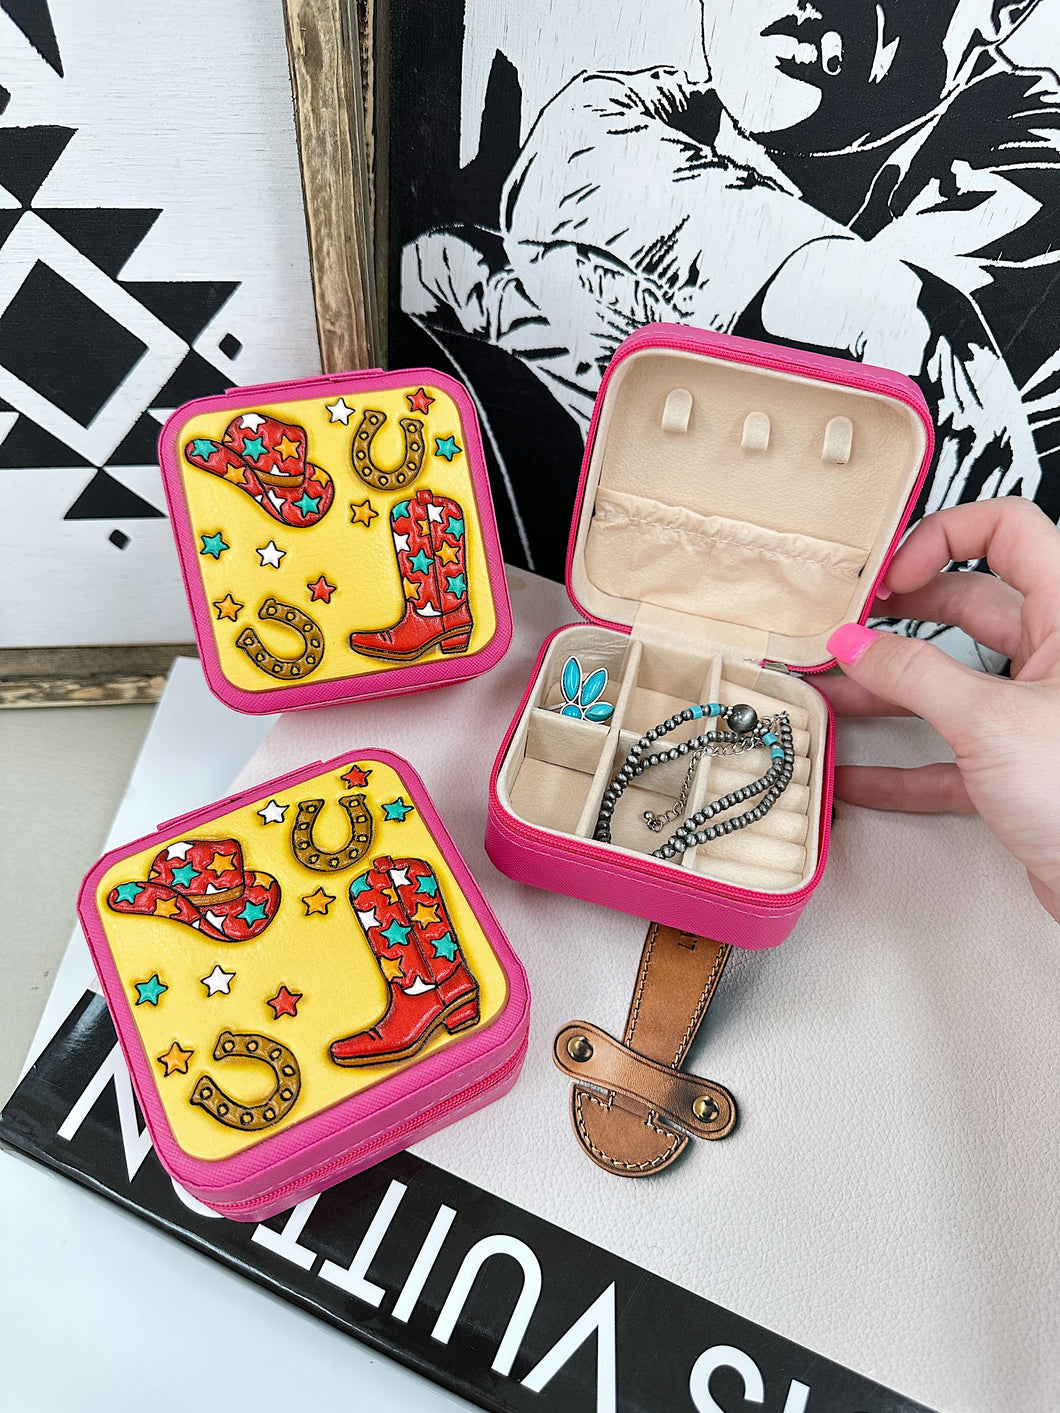 The Cowgirl Travel Jewelry Box